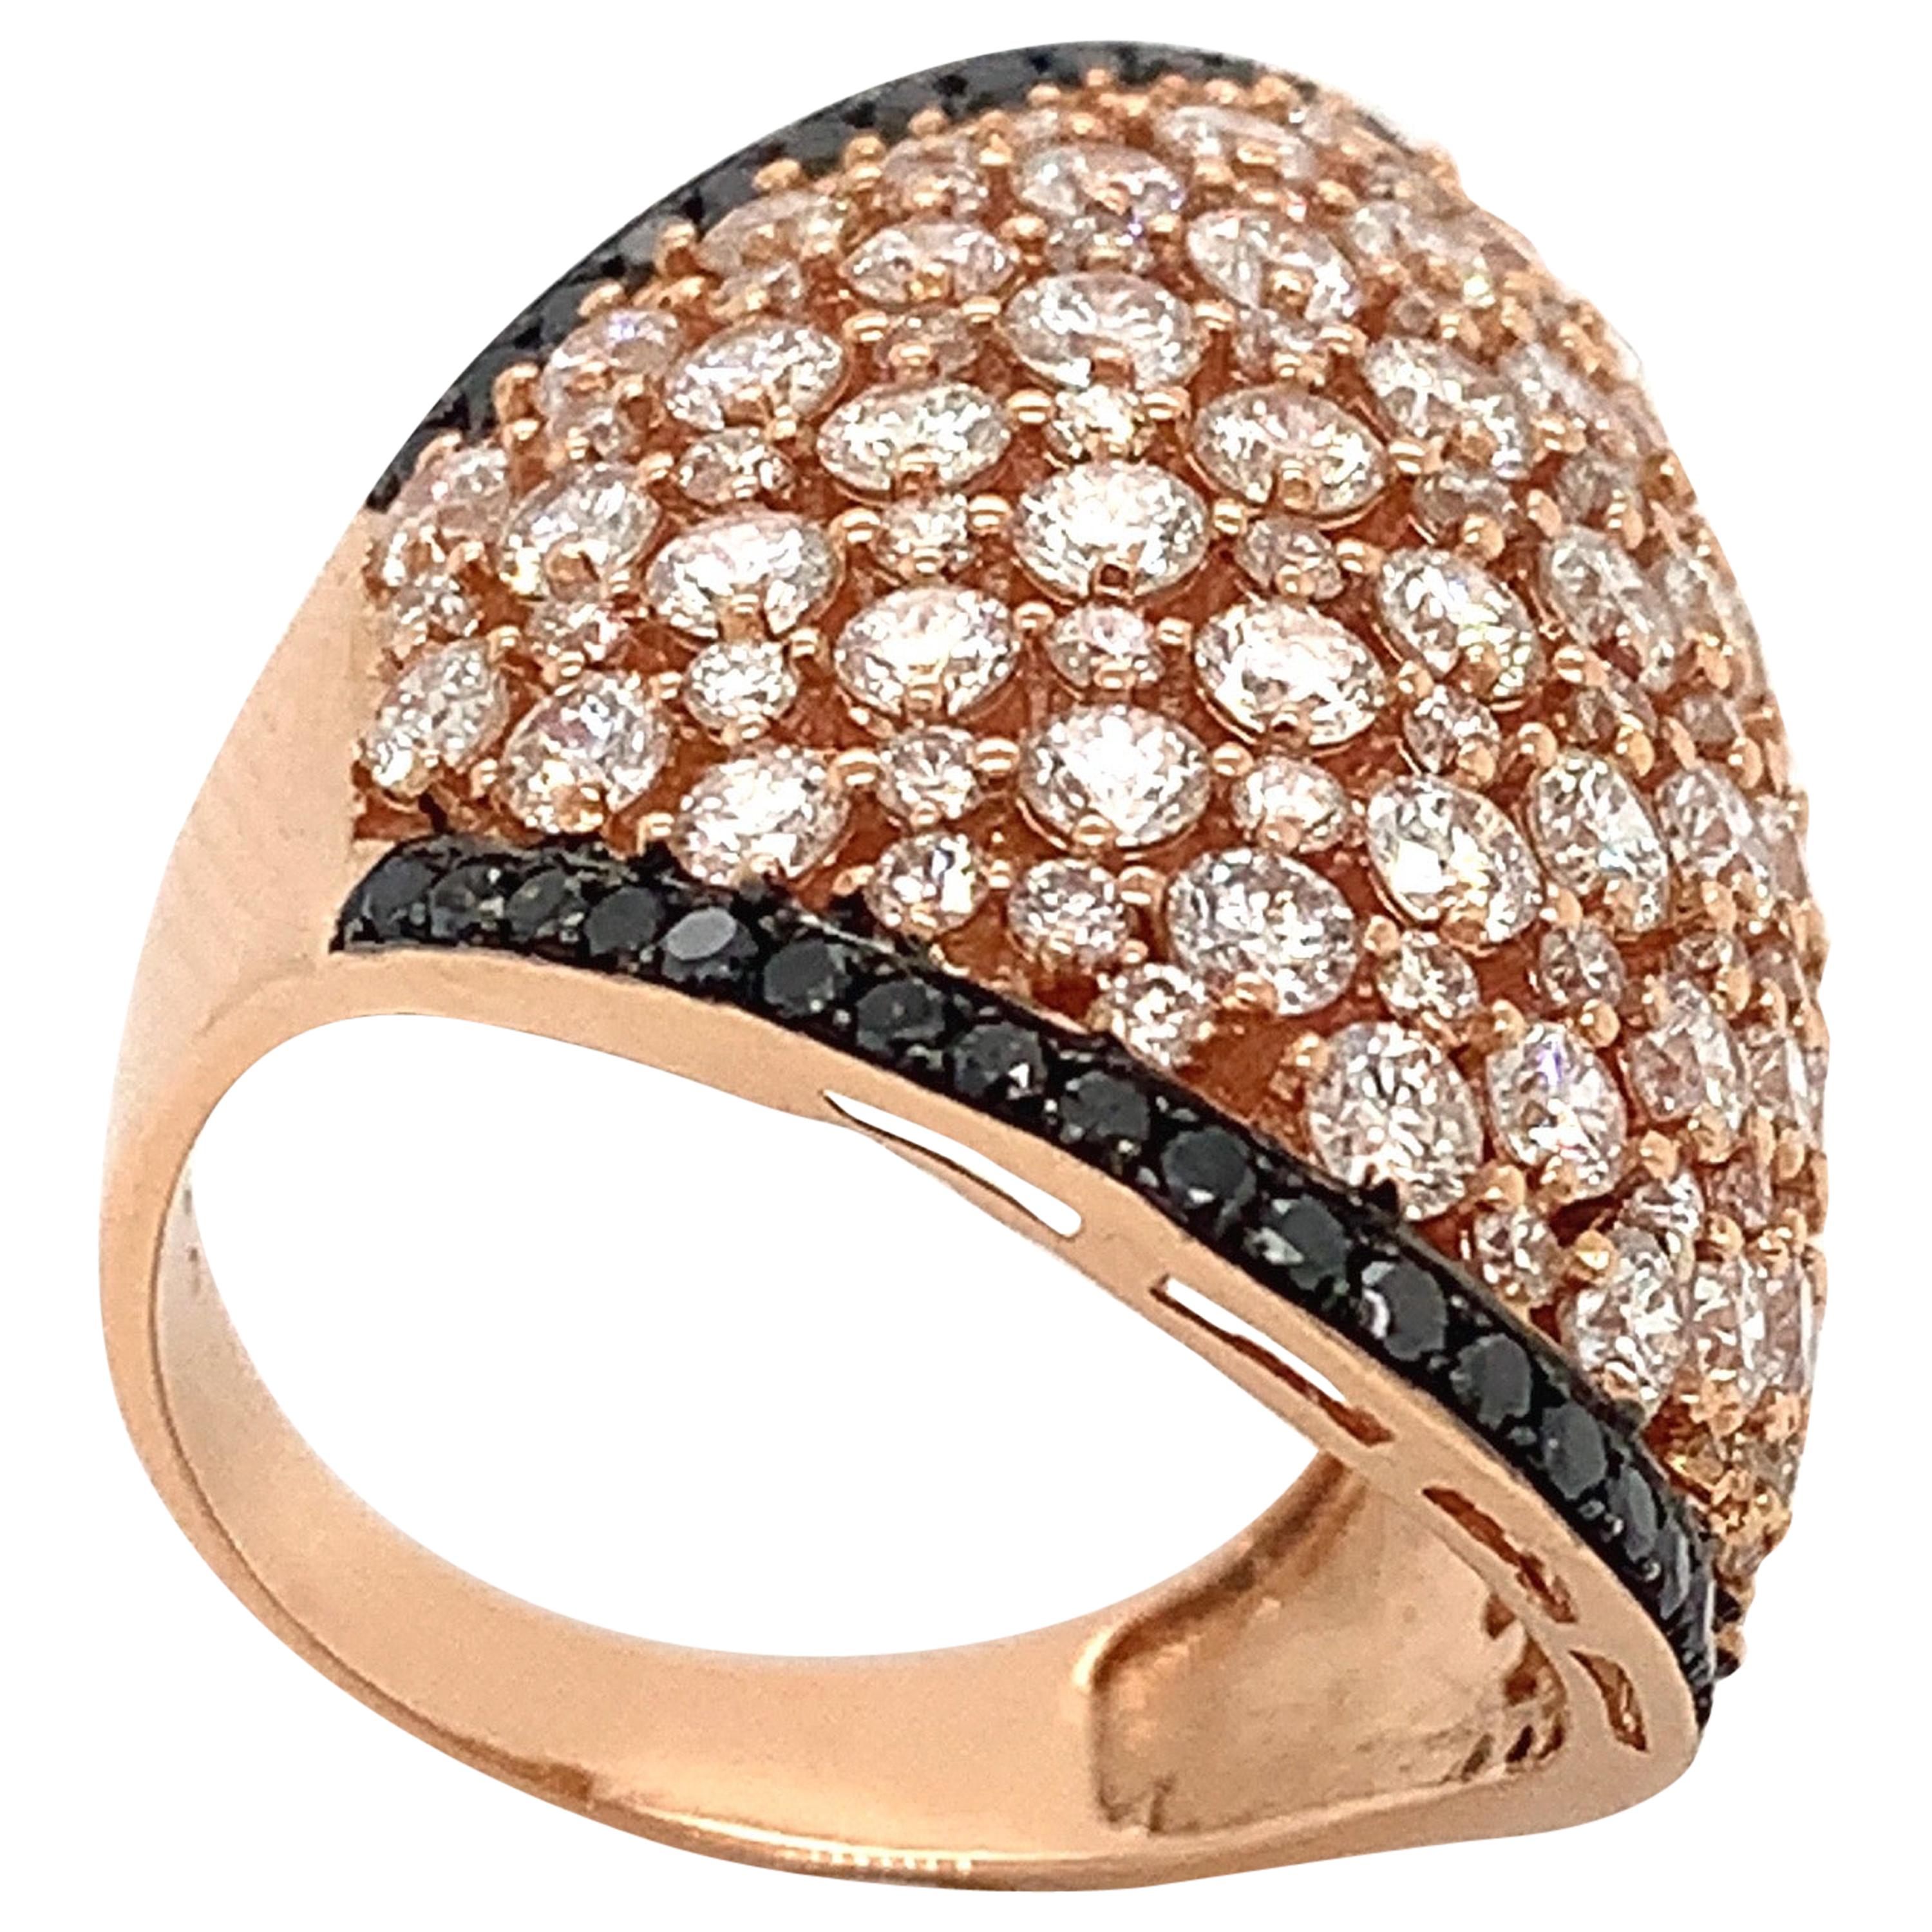 Own Your Story 18 Karat Gold White & Black Diamond Outlined Rounded Shield Ring